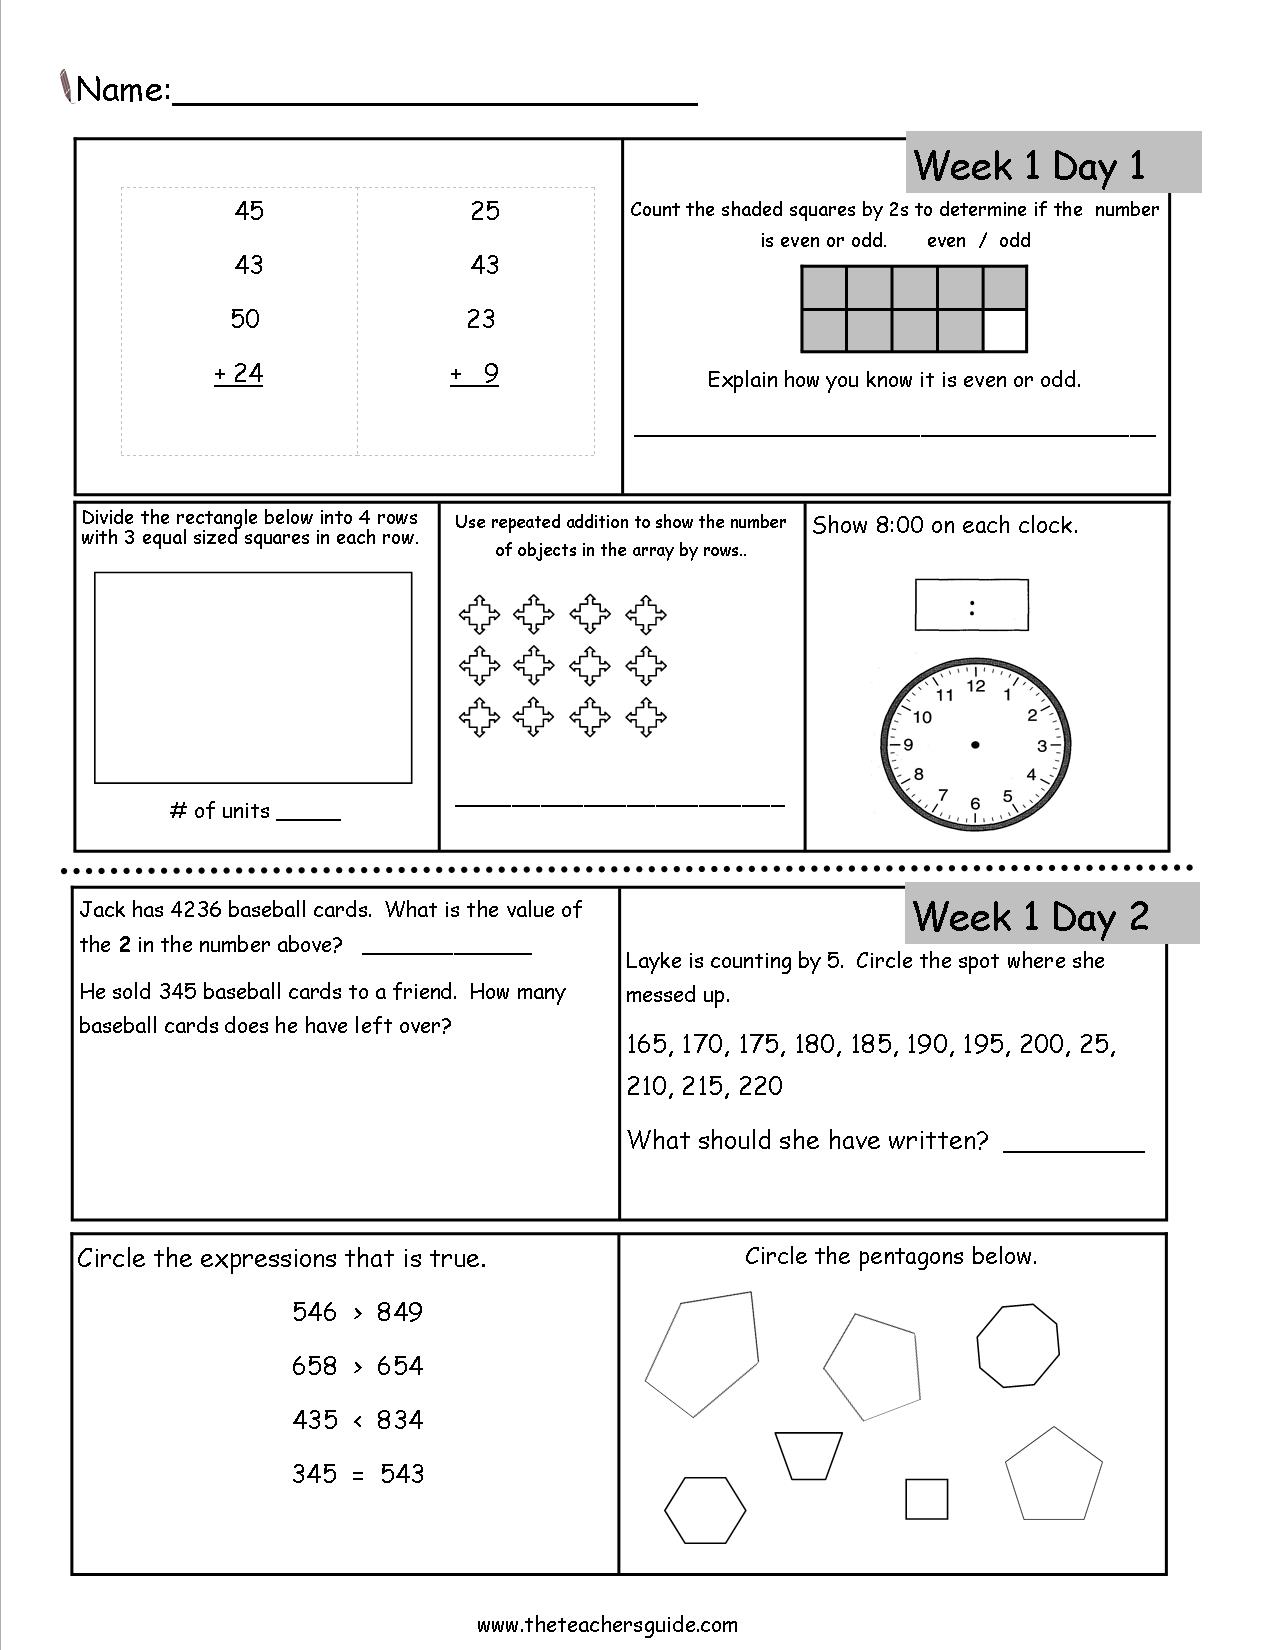 Free 3rd Grade Math Students Activity Shelter Db Excelcom Third Grade Worksheet For Super